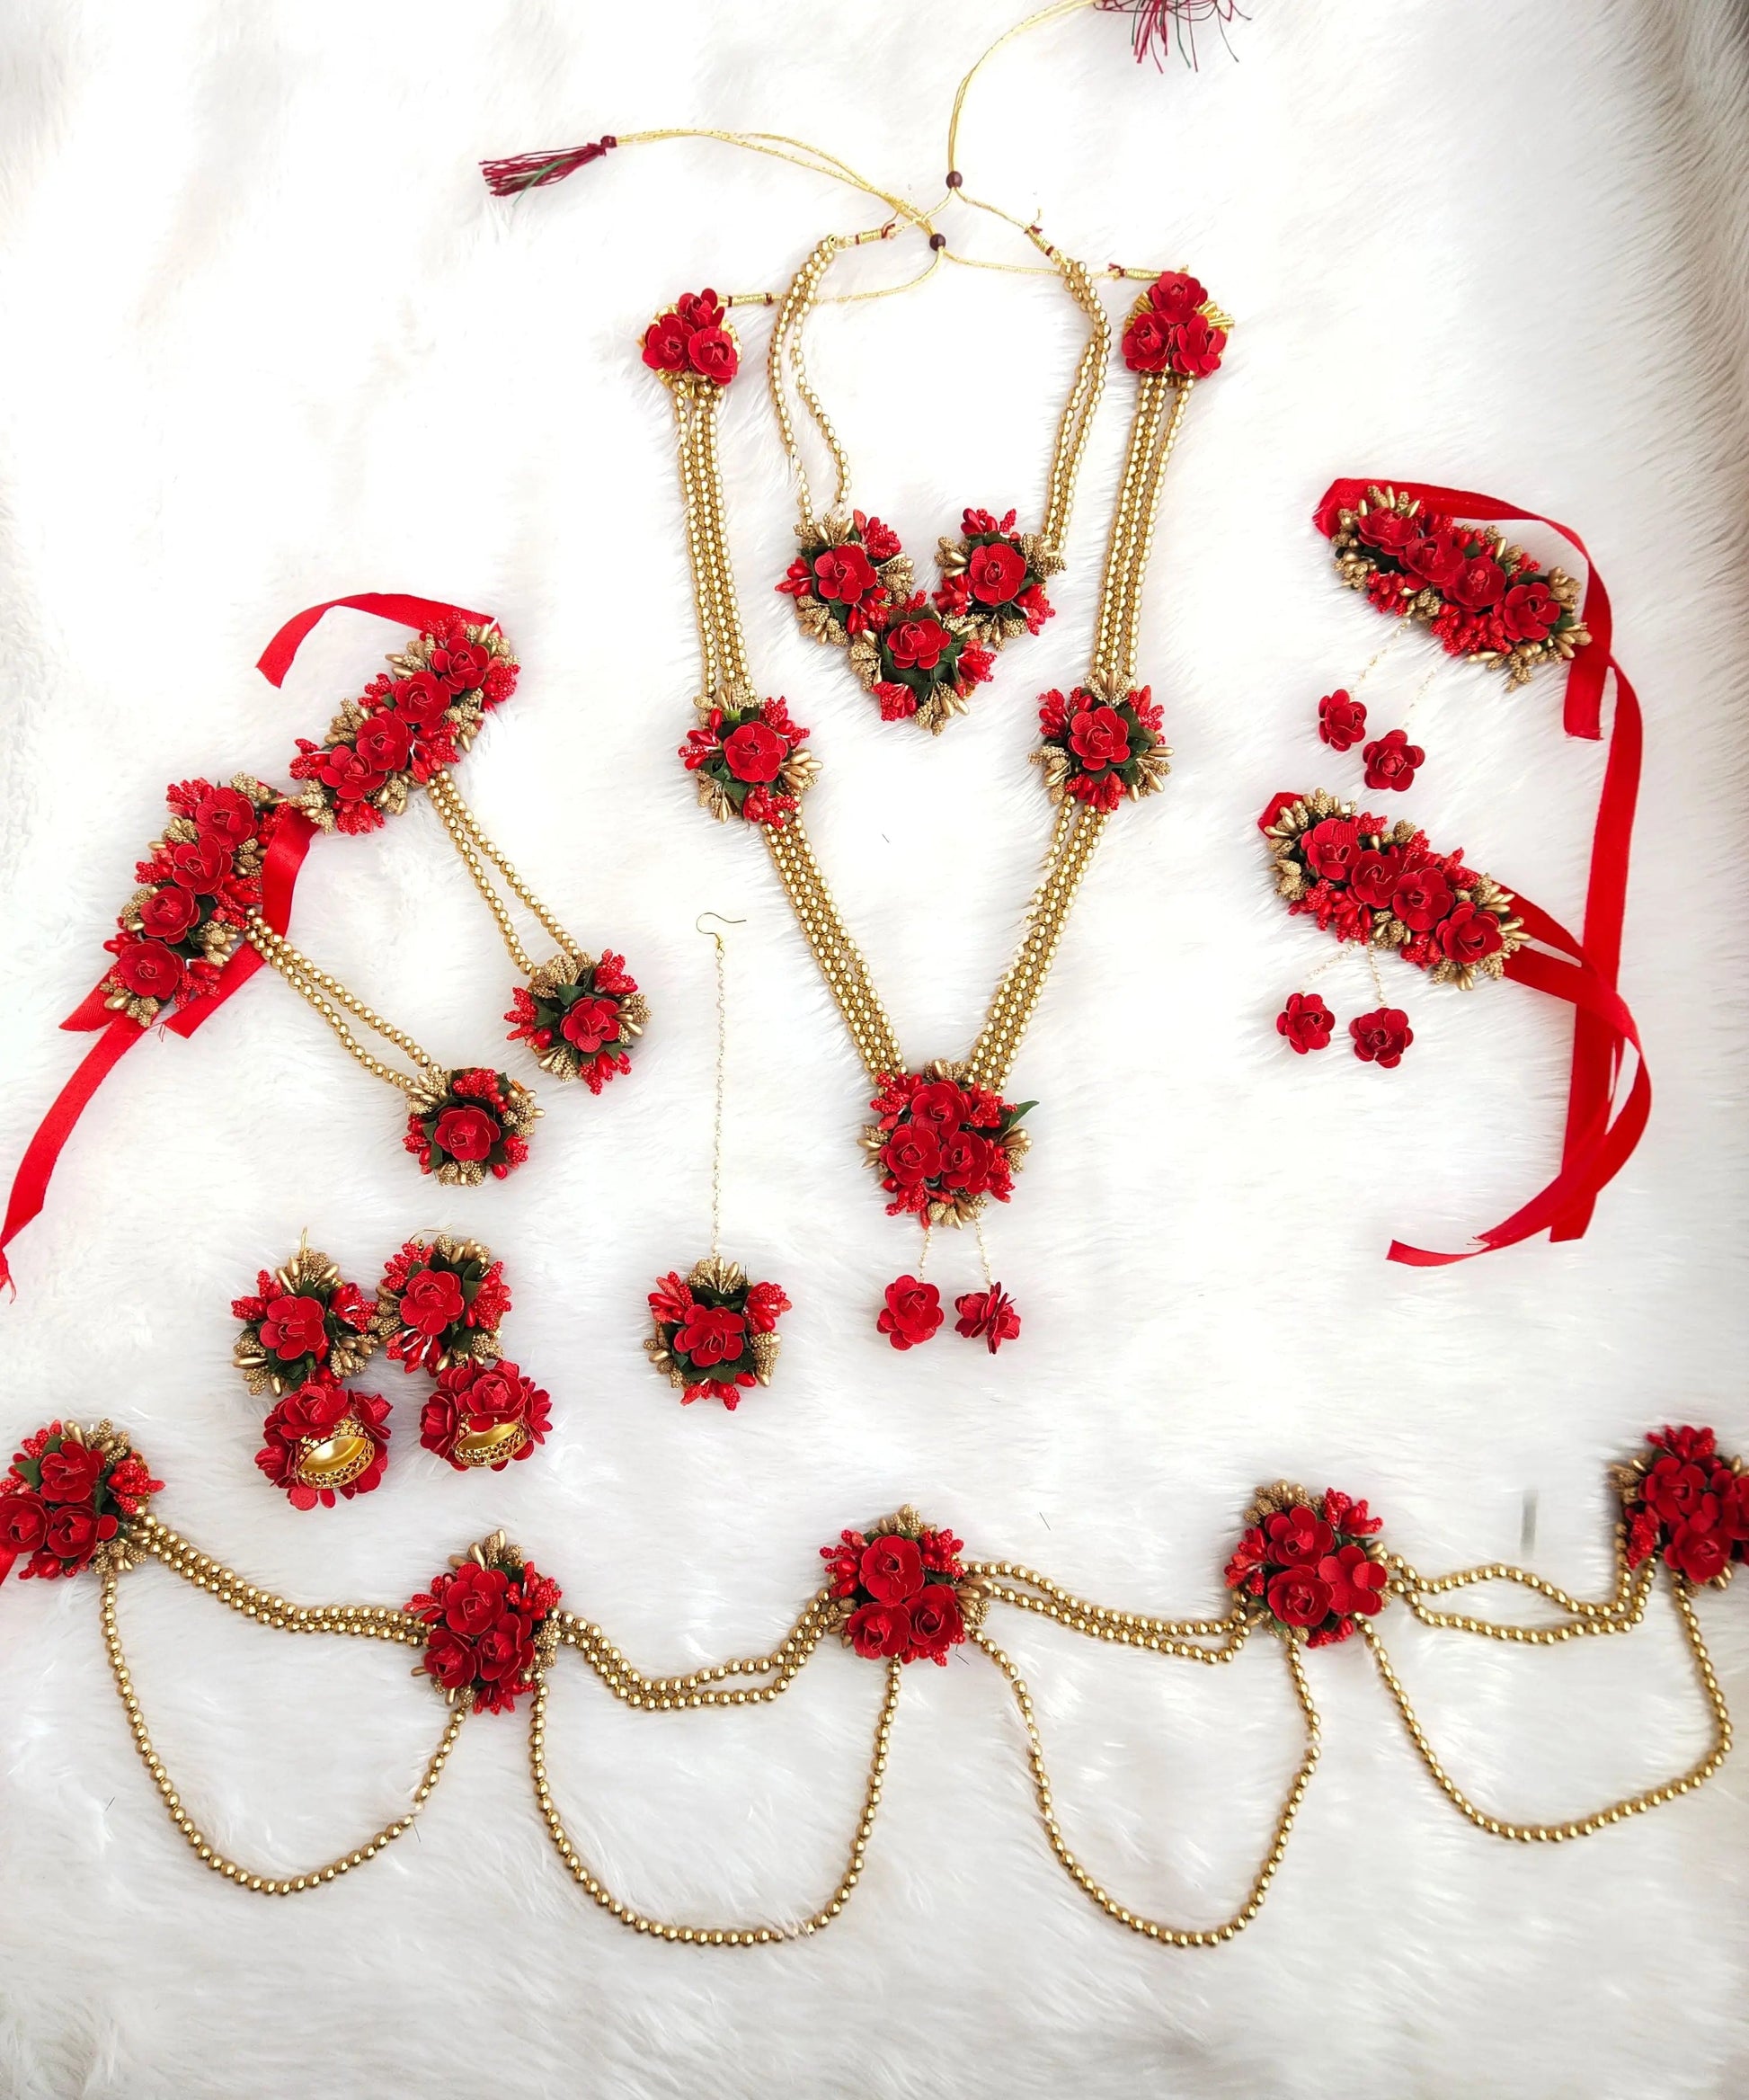 Red Blossom Baby Shower Jewelry Set: Elegant and Adorable Flower  Accessories for Your Little One's Special Day!